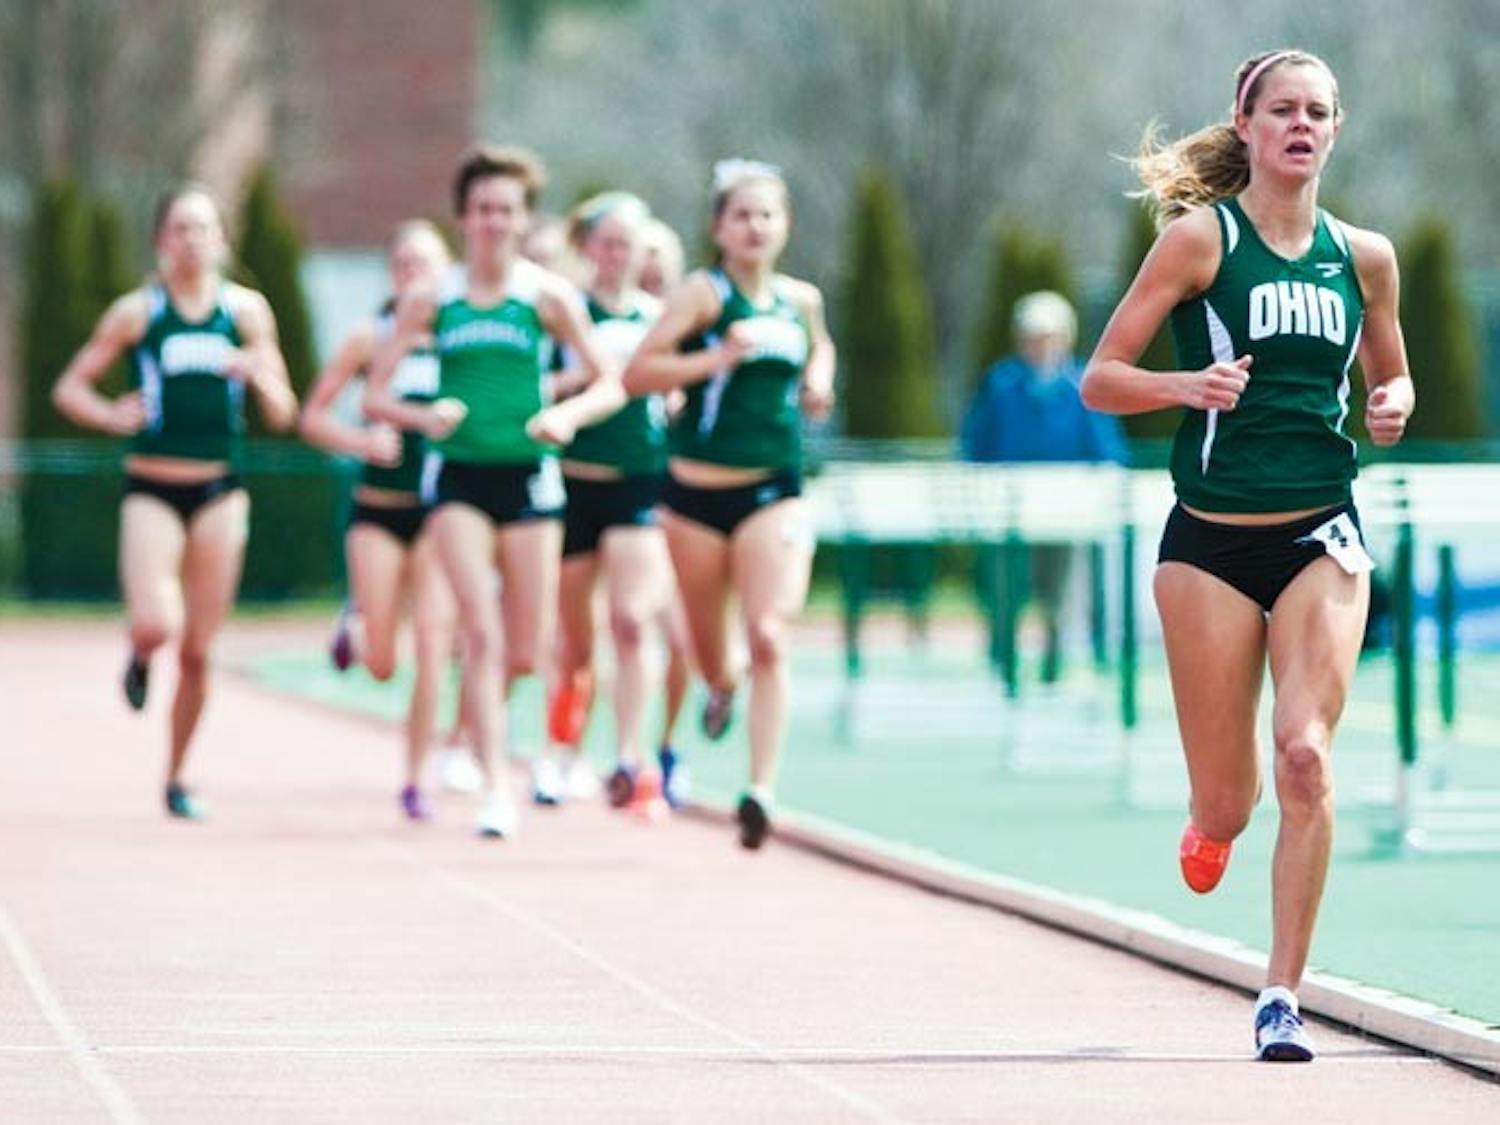 Track & Field: Without indoor venue, recruitment struggles  